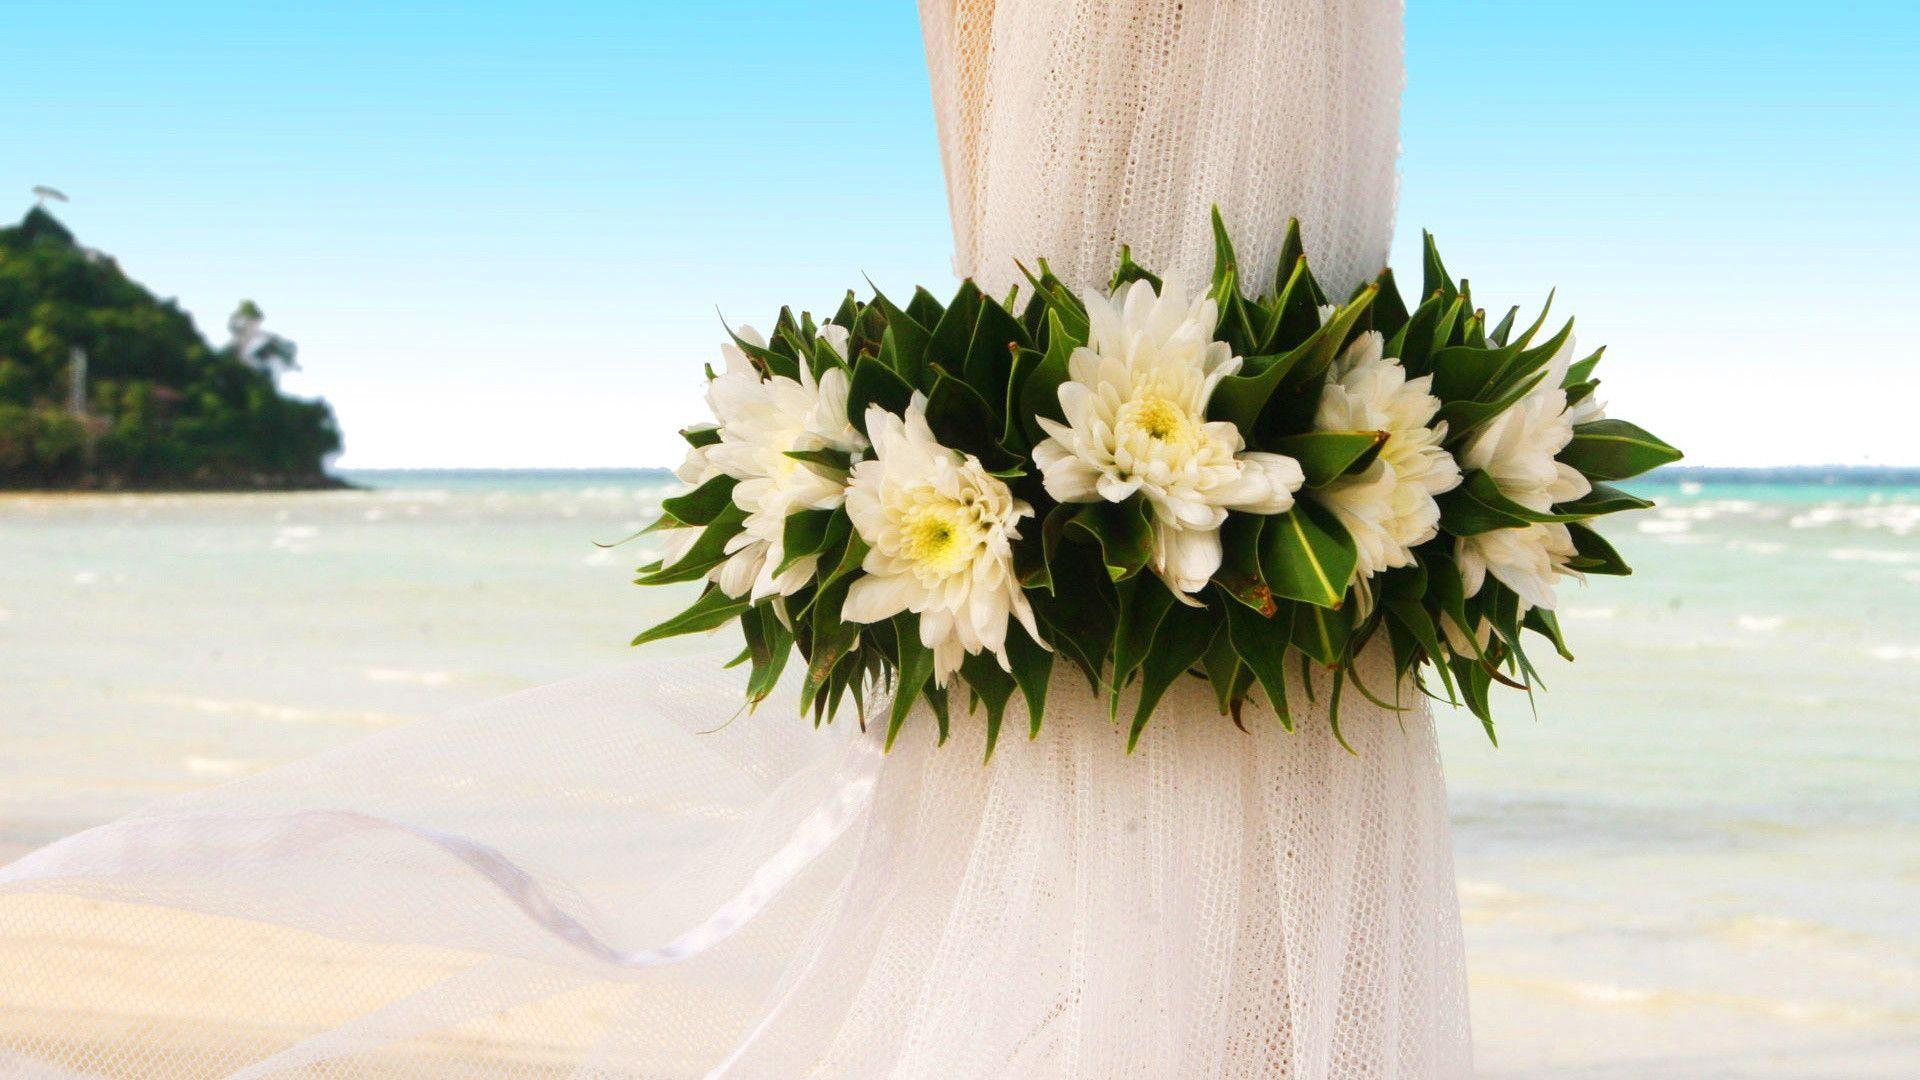 Wallpapers For > Wedding Backgrounds Hd